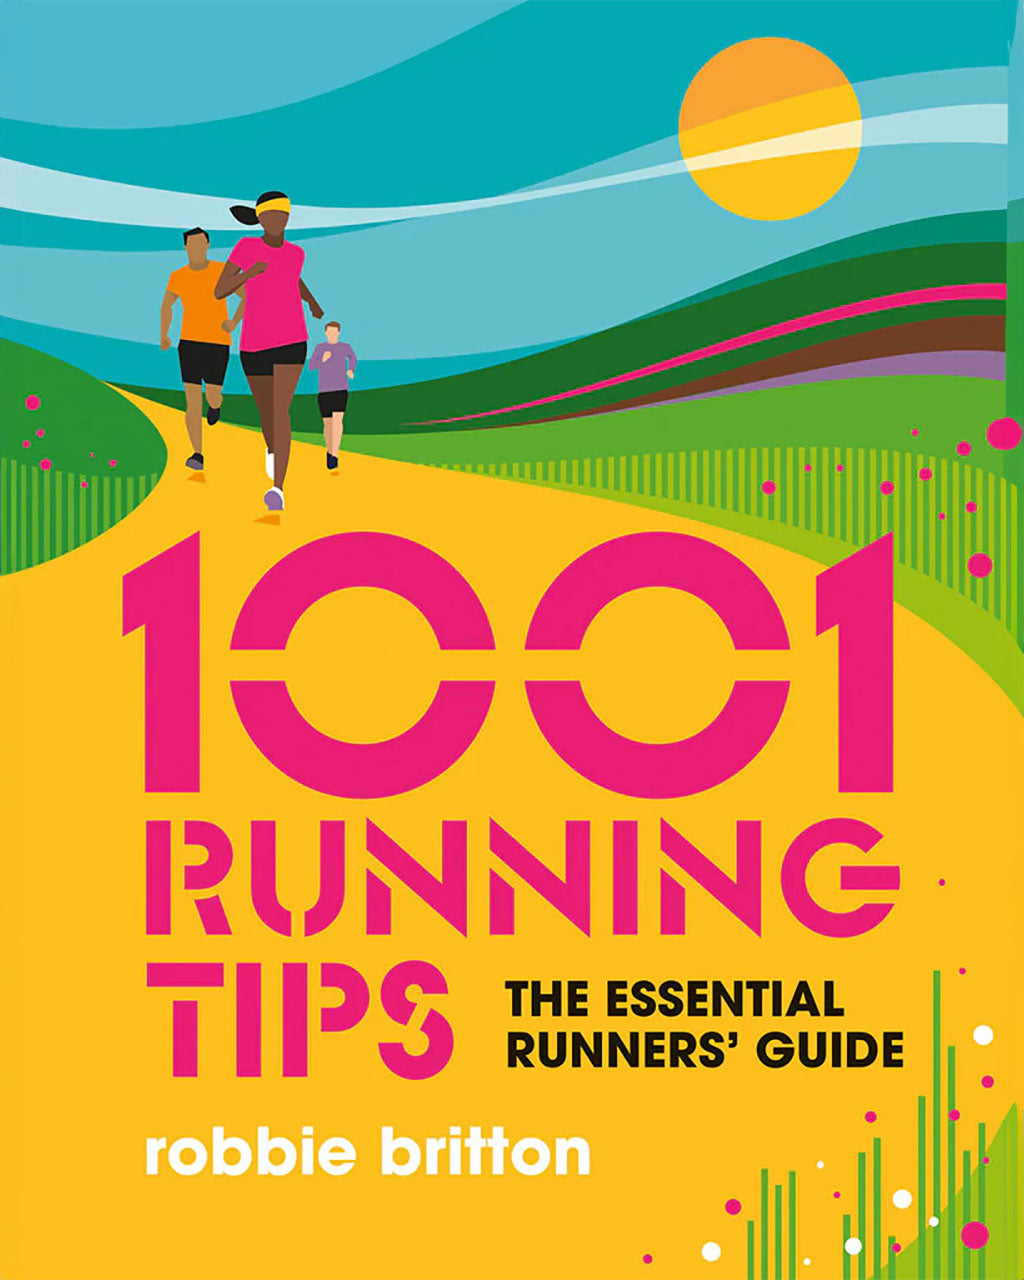 1001 Running Tips - The Essential Running Guide by Robbie Britton